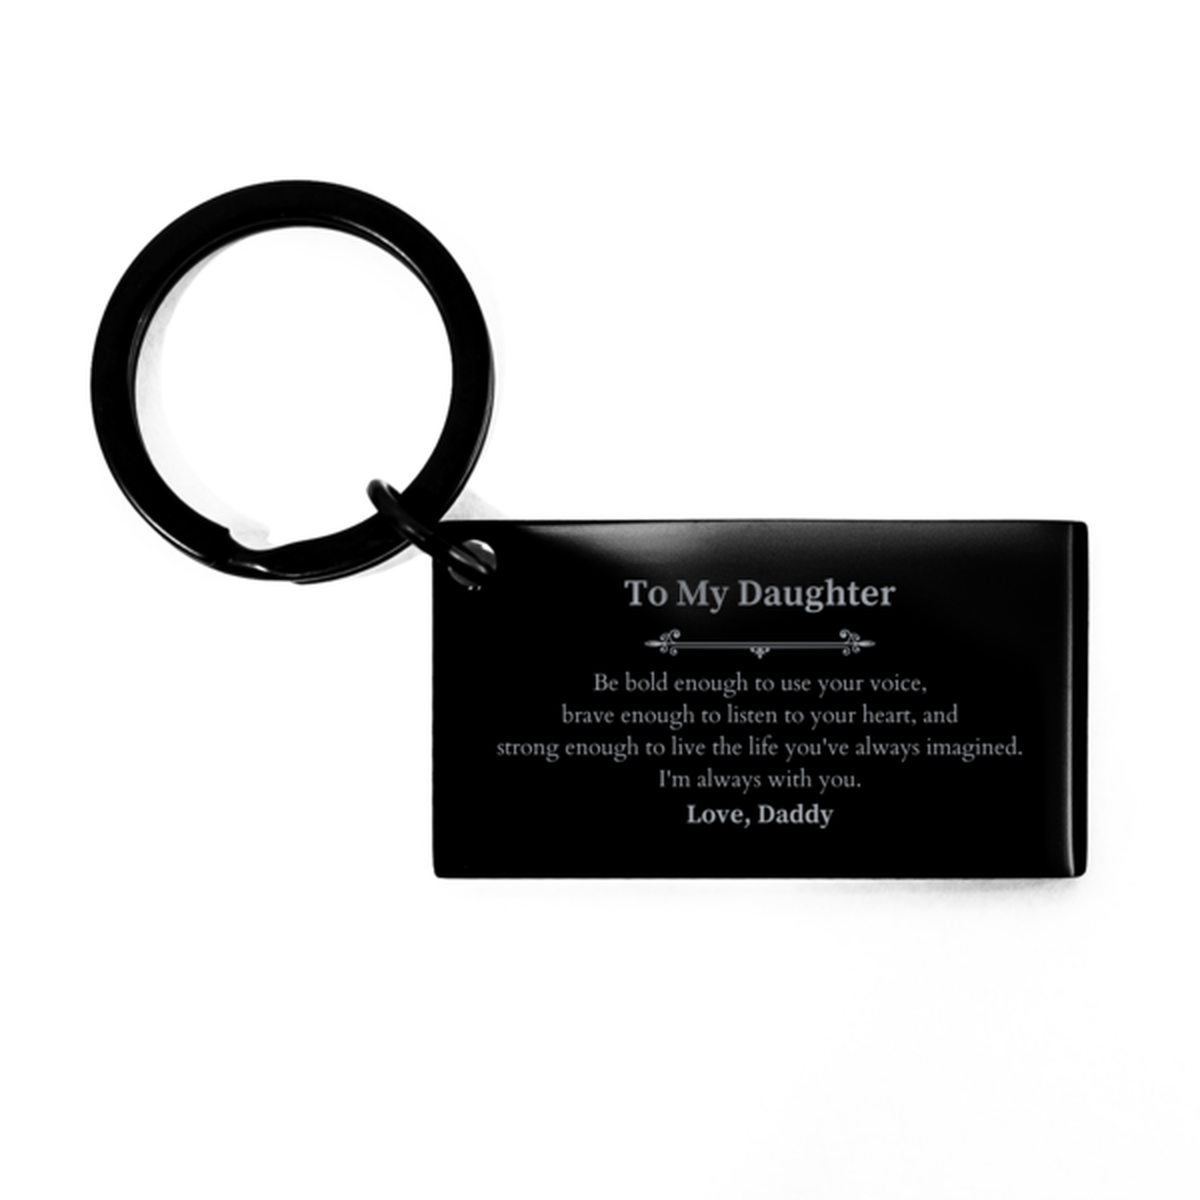 Keepsake Daughter Keychain Gift Idea Graduation Christmas Birthday Daughter from Daddy, Daughter Be bold enough to use your voice, brave enough to listen to your heart. Love, Daddy